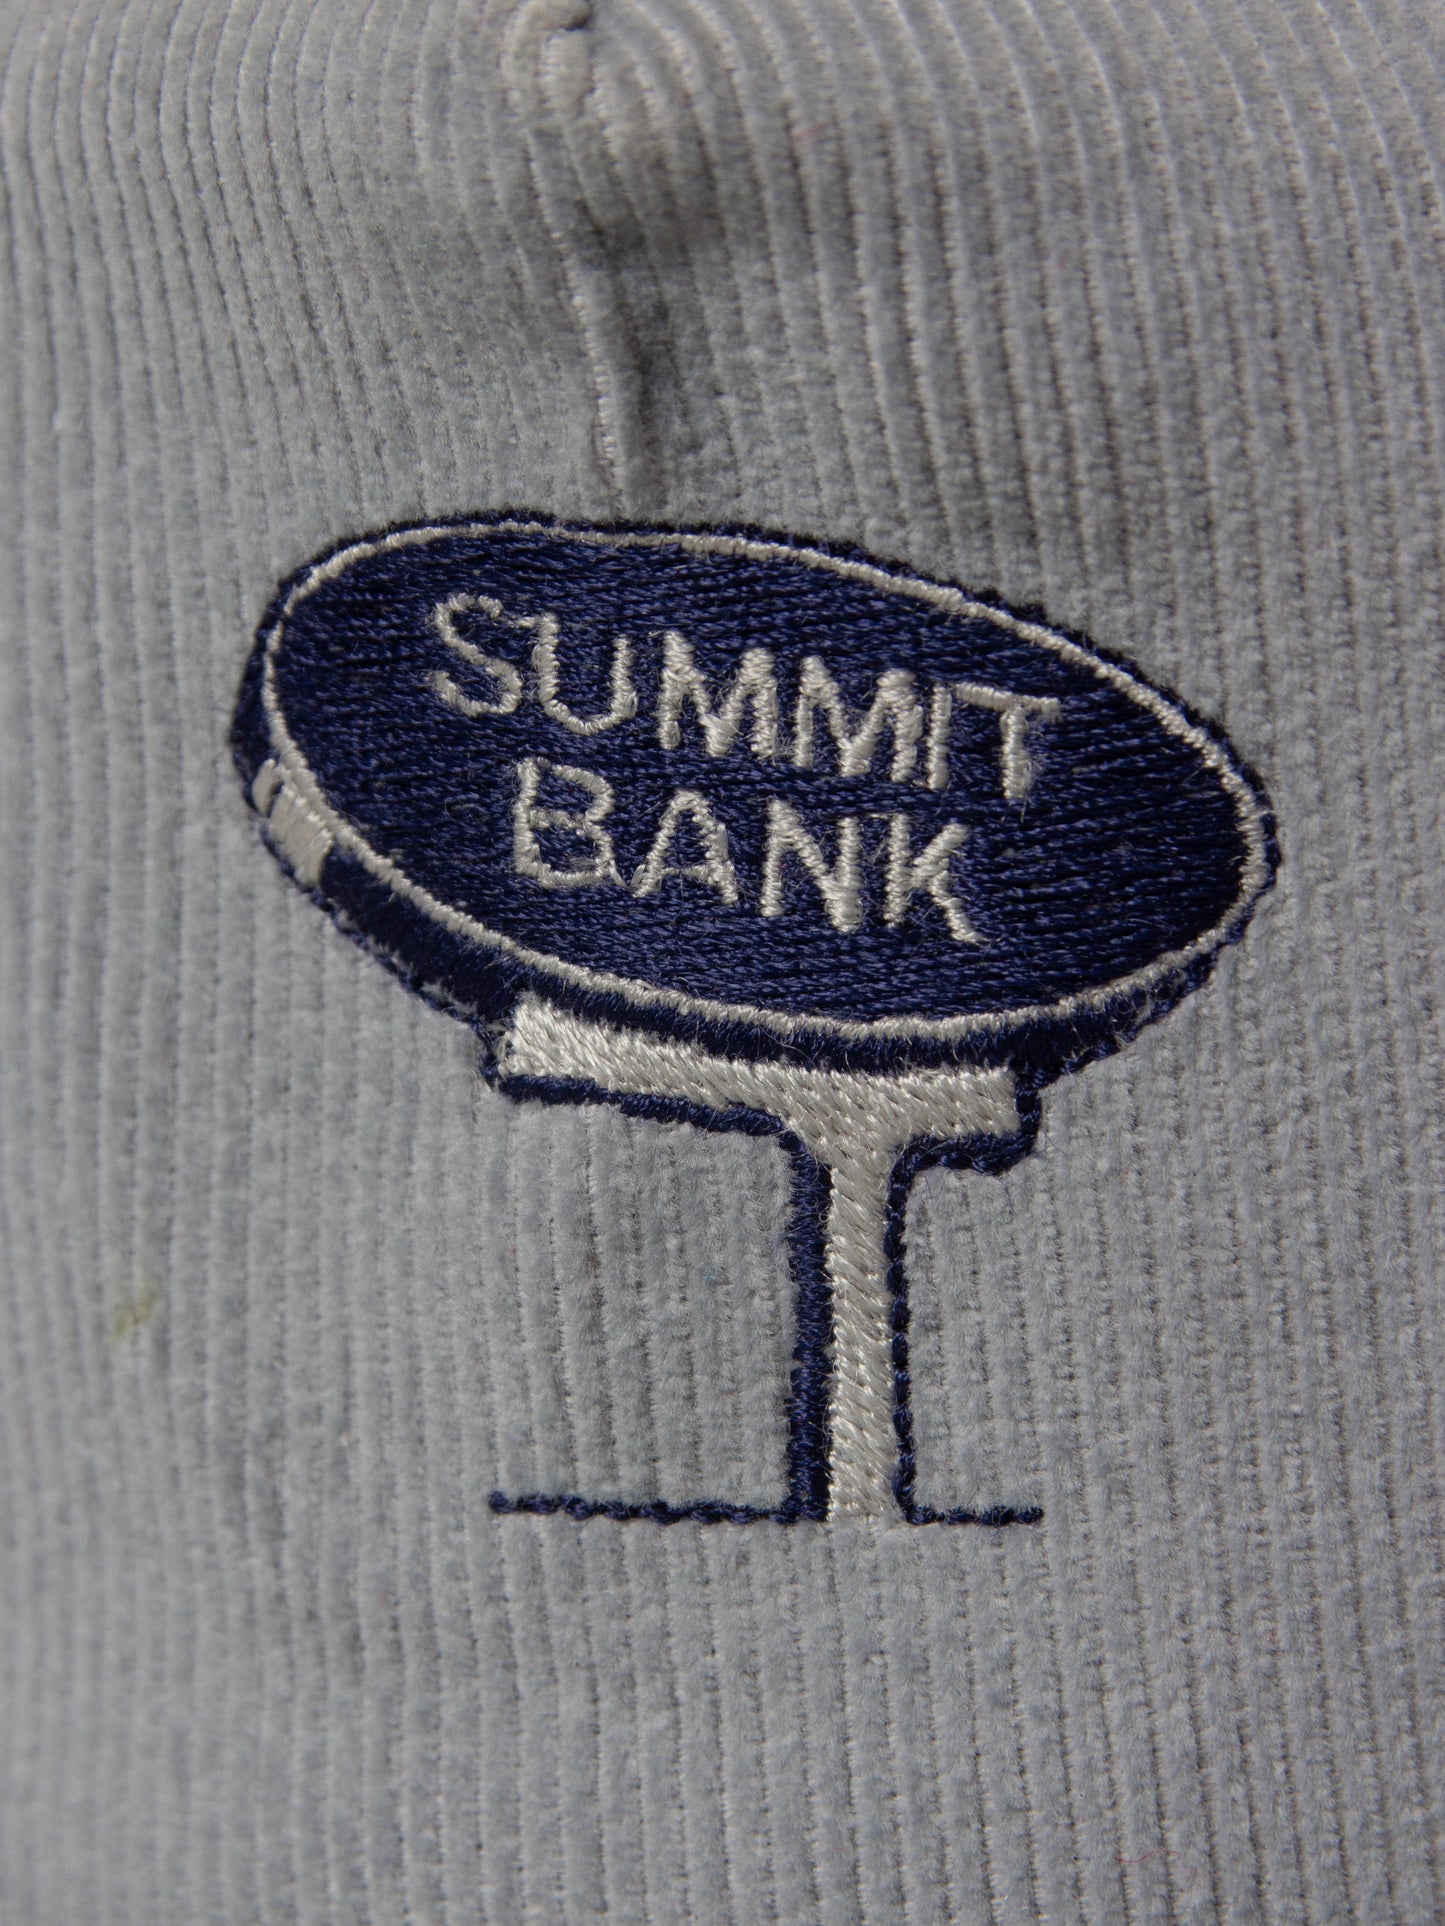 Vtg 1990s Summit Bank Corduroy Cap - Made in USA (OS)